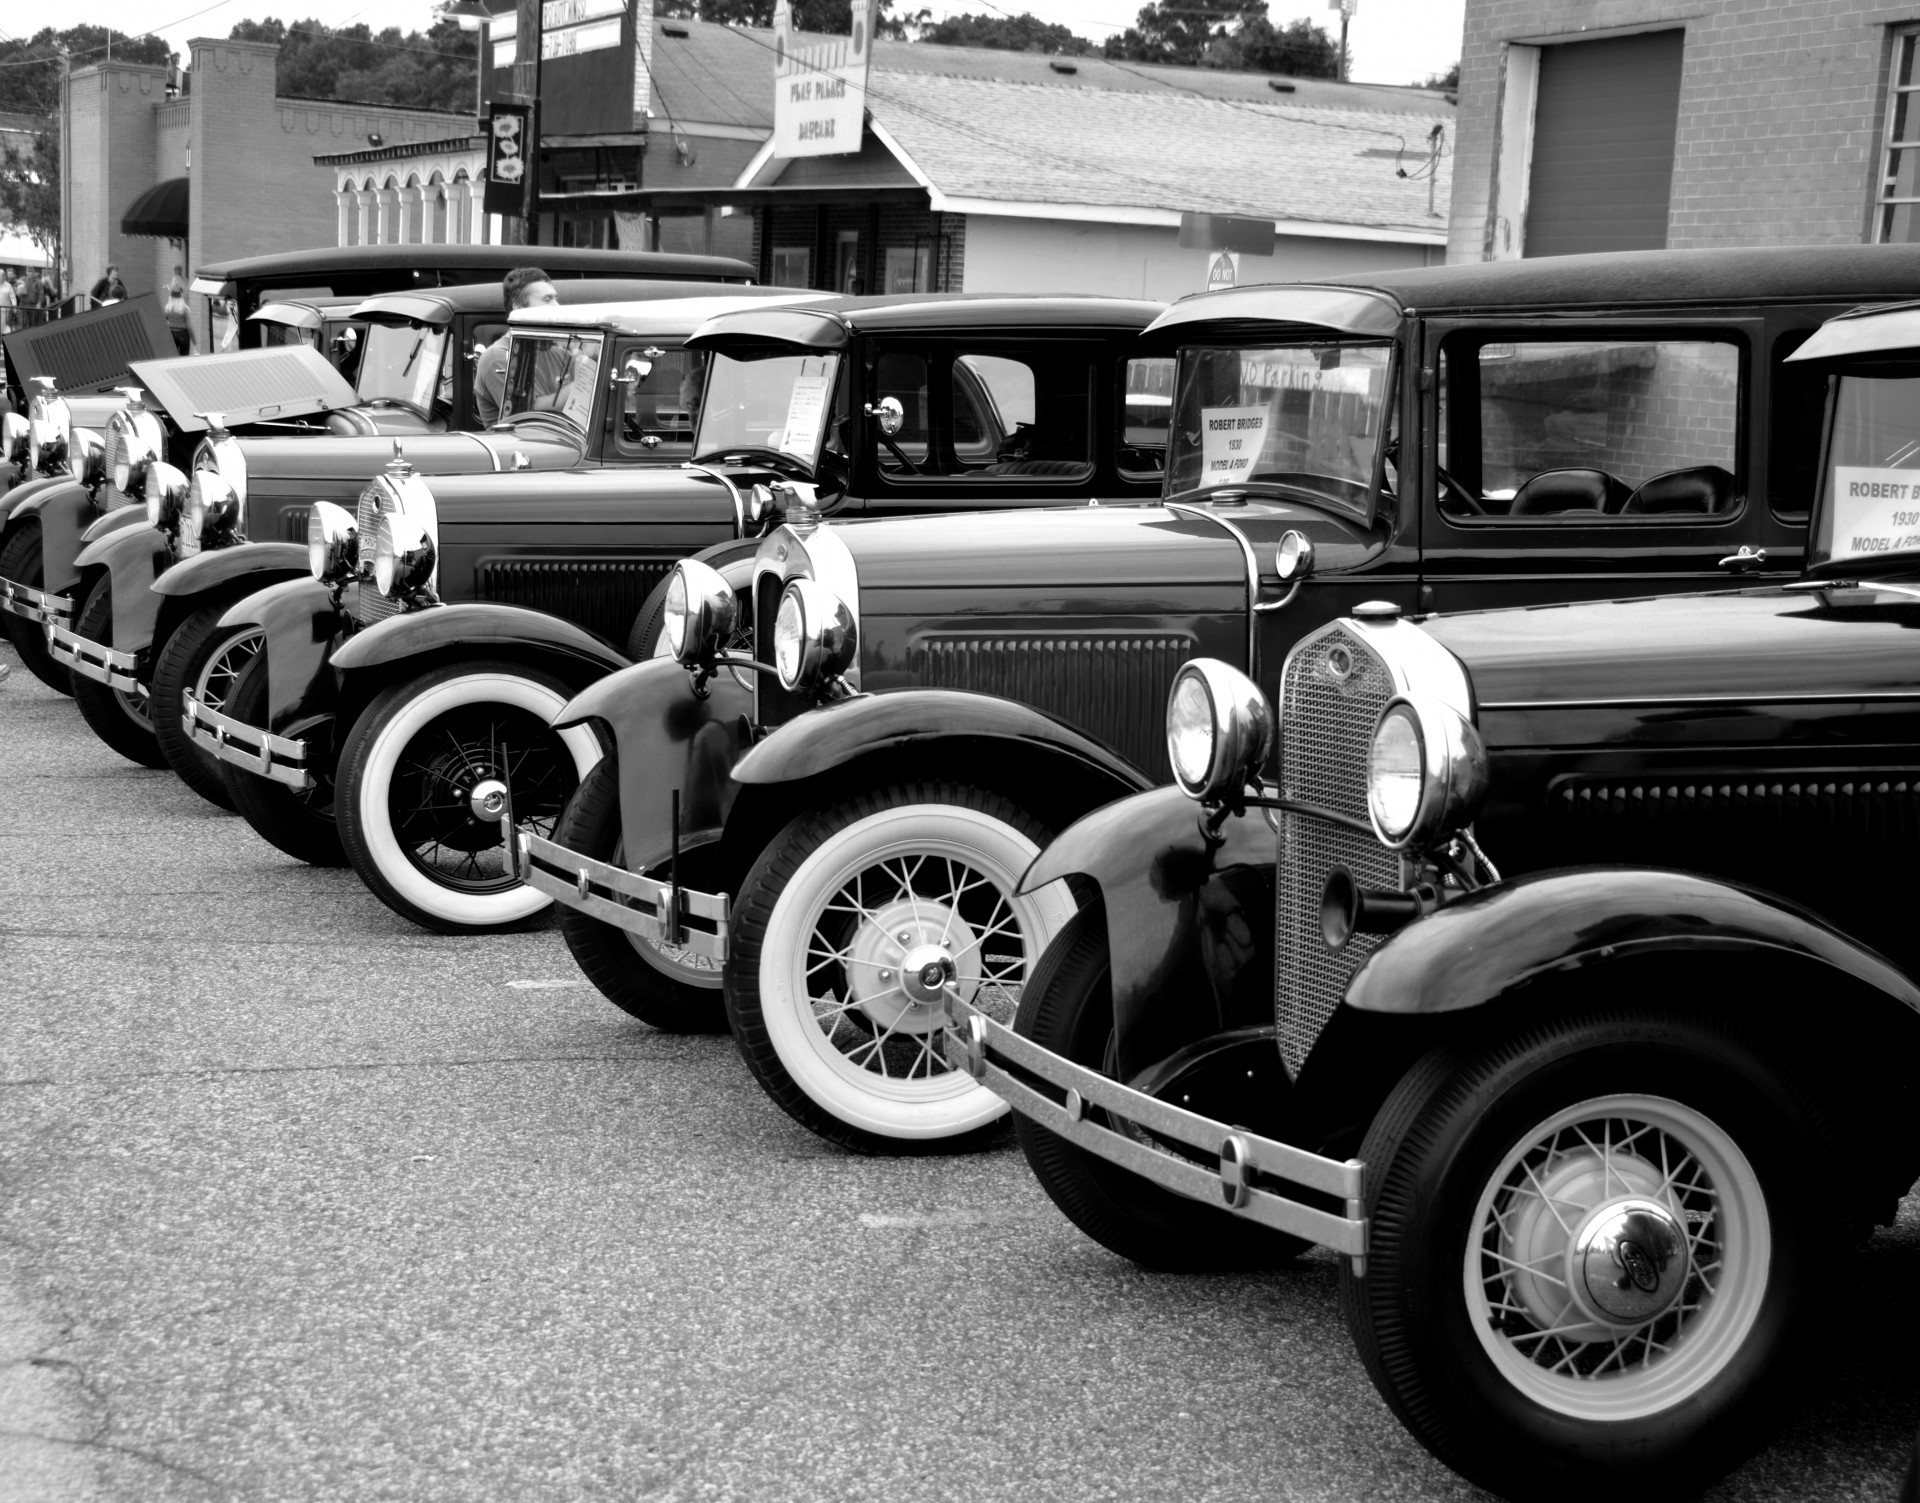 Vintage cars in black and white